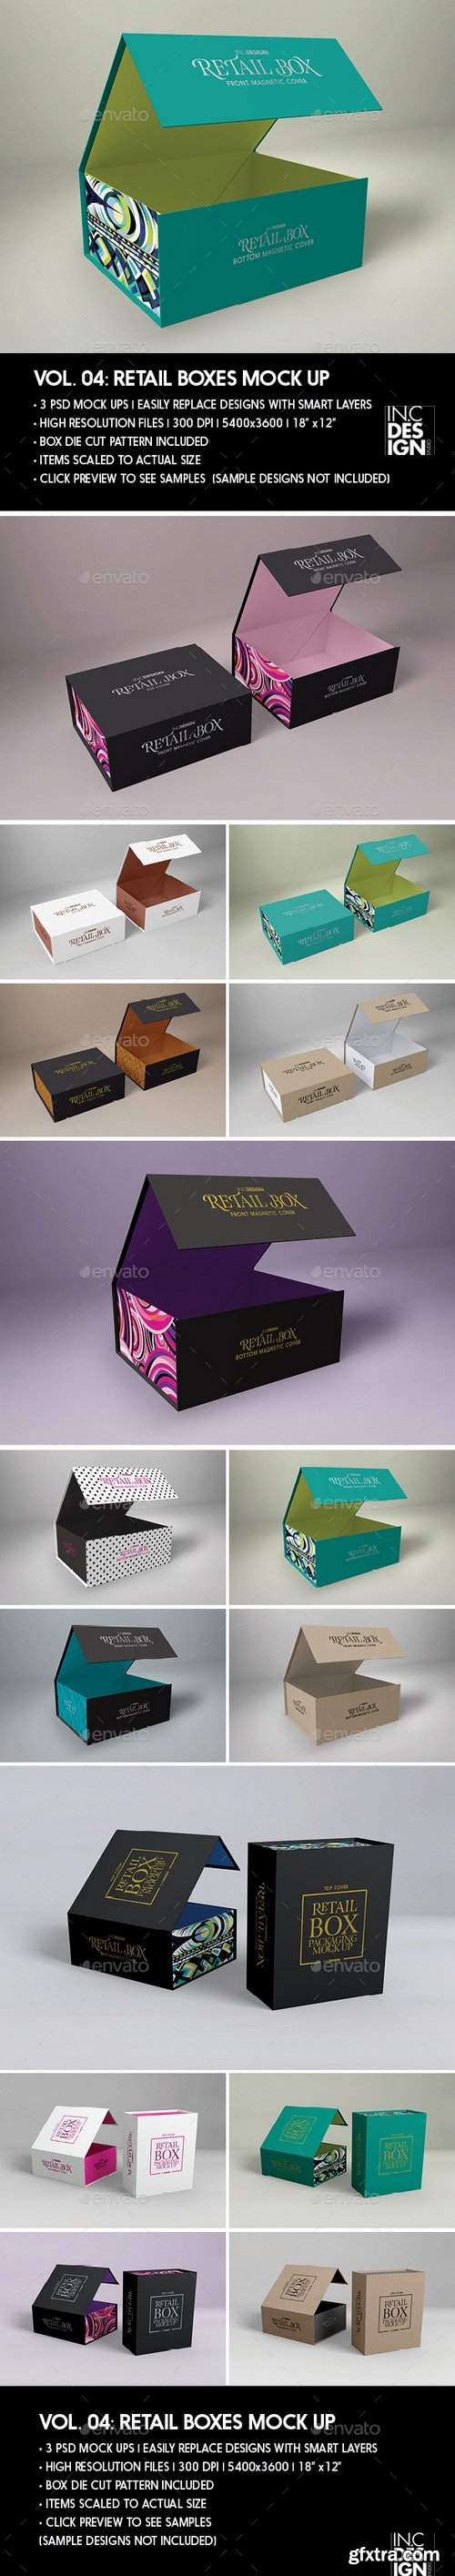 Graphicriver - Retail Boxes Vol.4: Magnetic Box Packaging Mock Ups 20249448